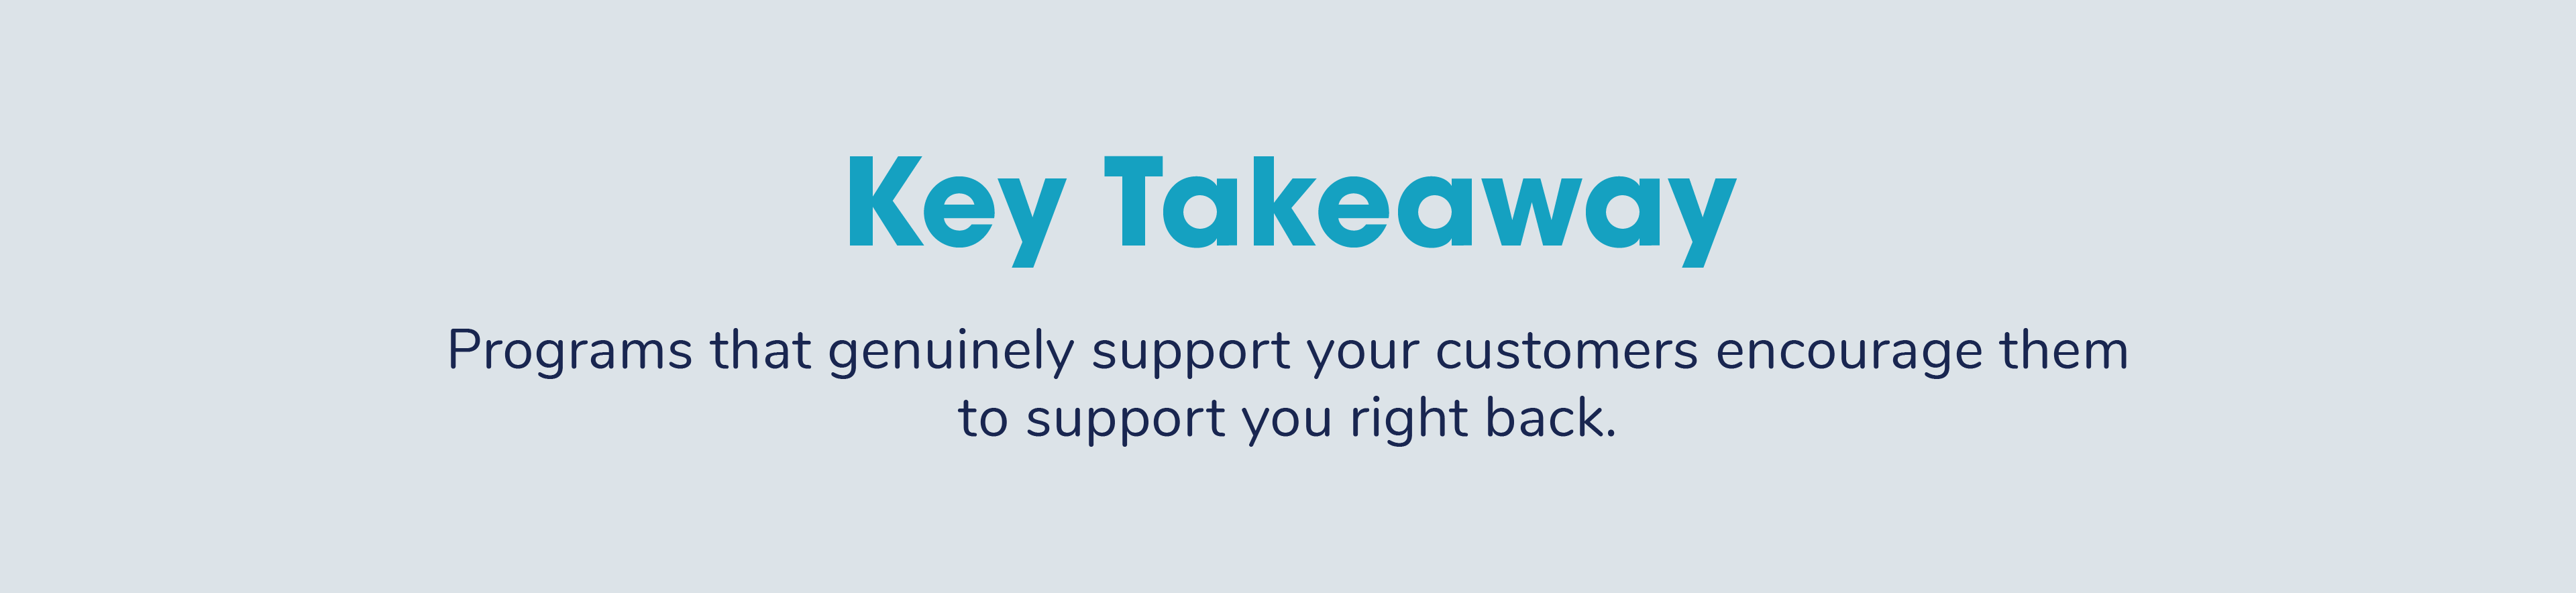 Support your customers and they will support you right back.